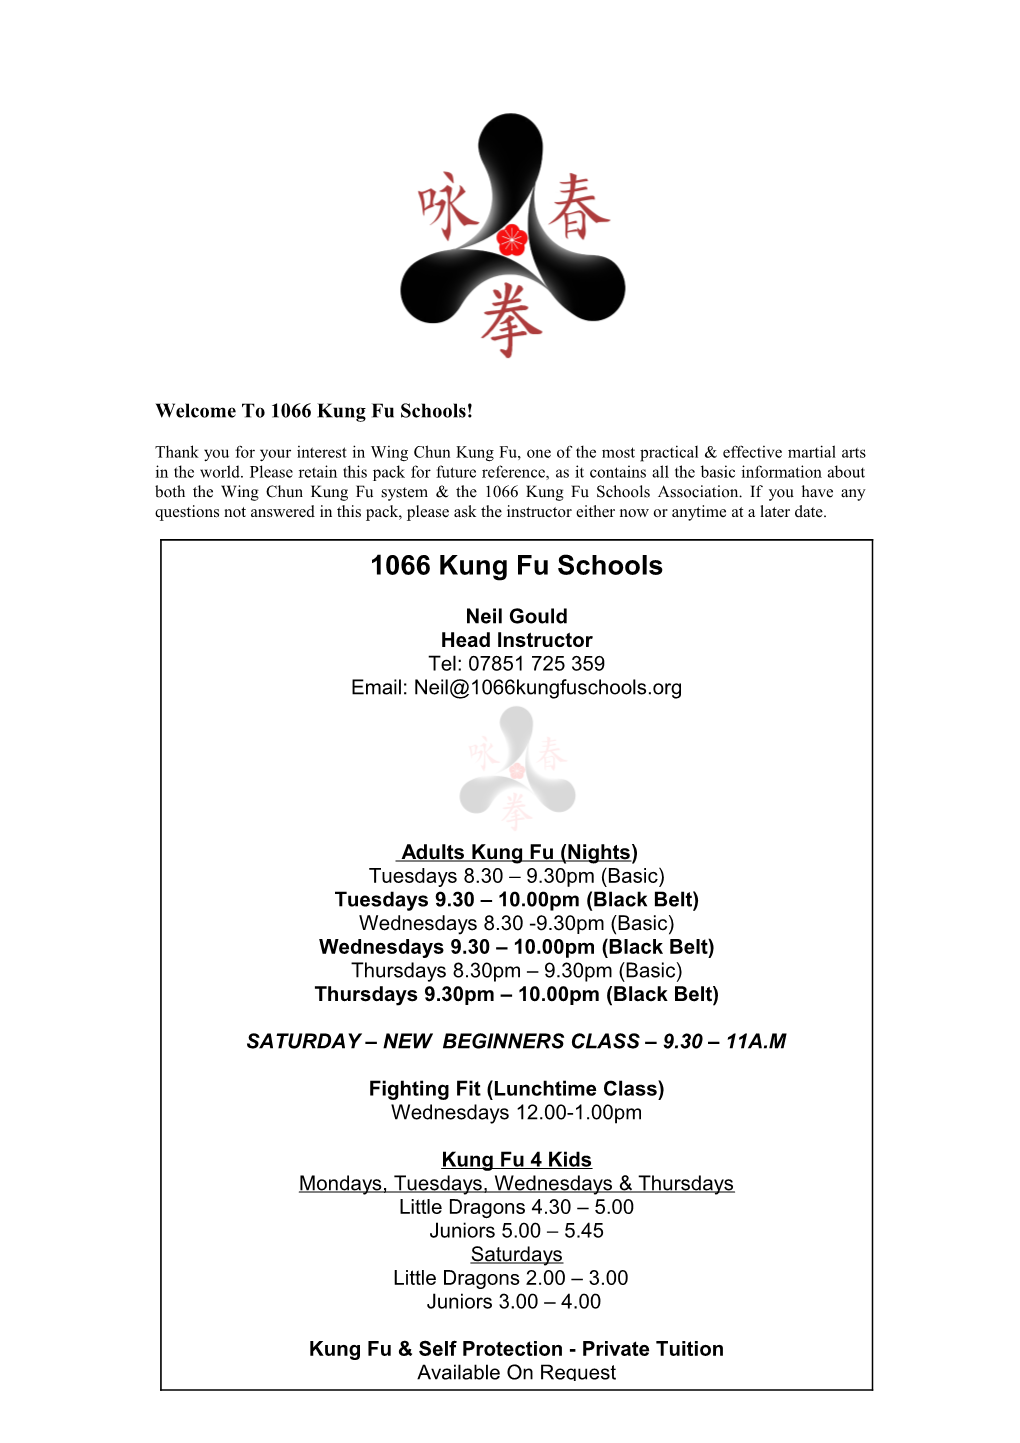 Welcome to 1066 Kung Fu Schools!